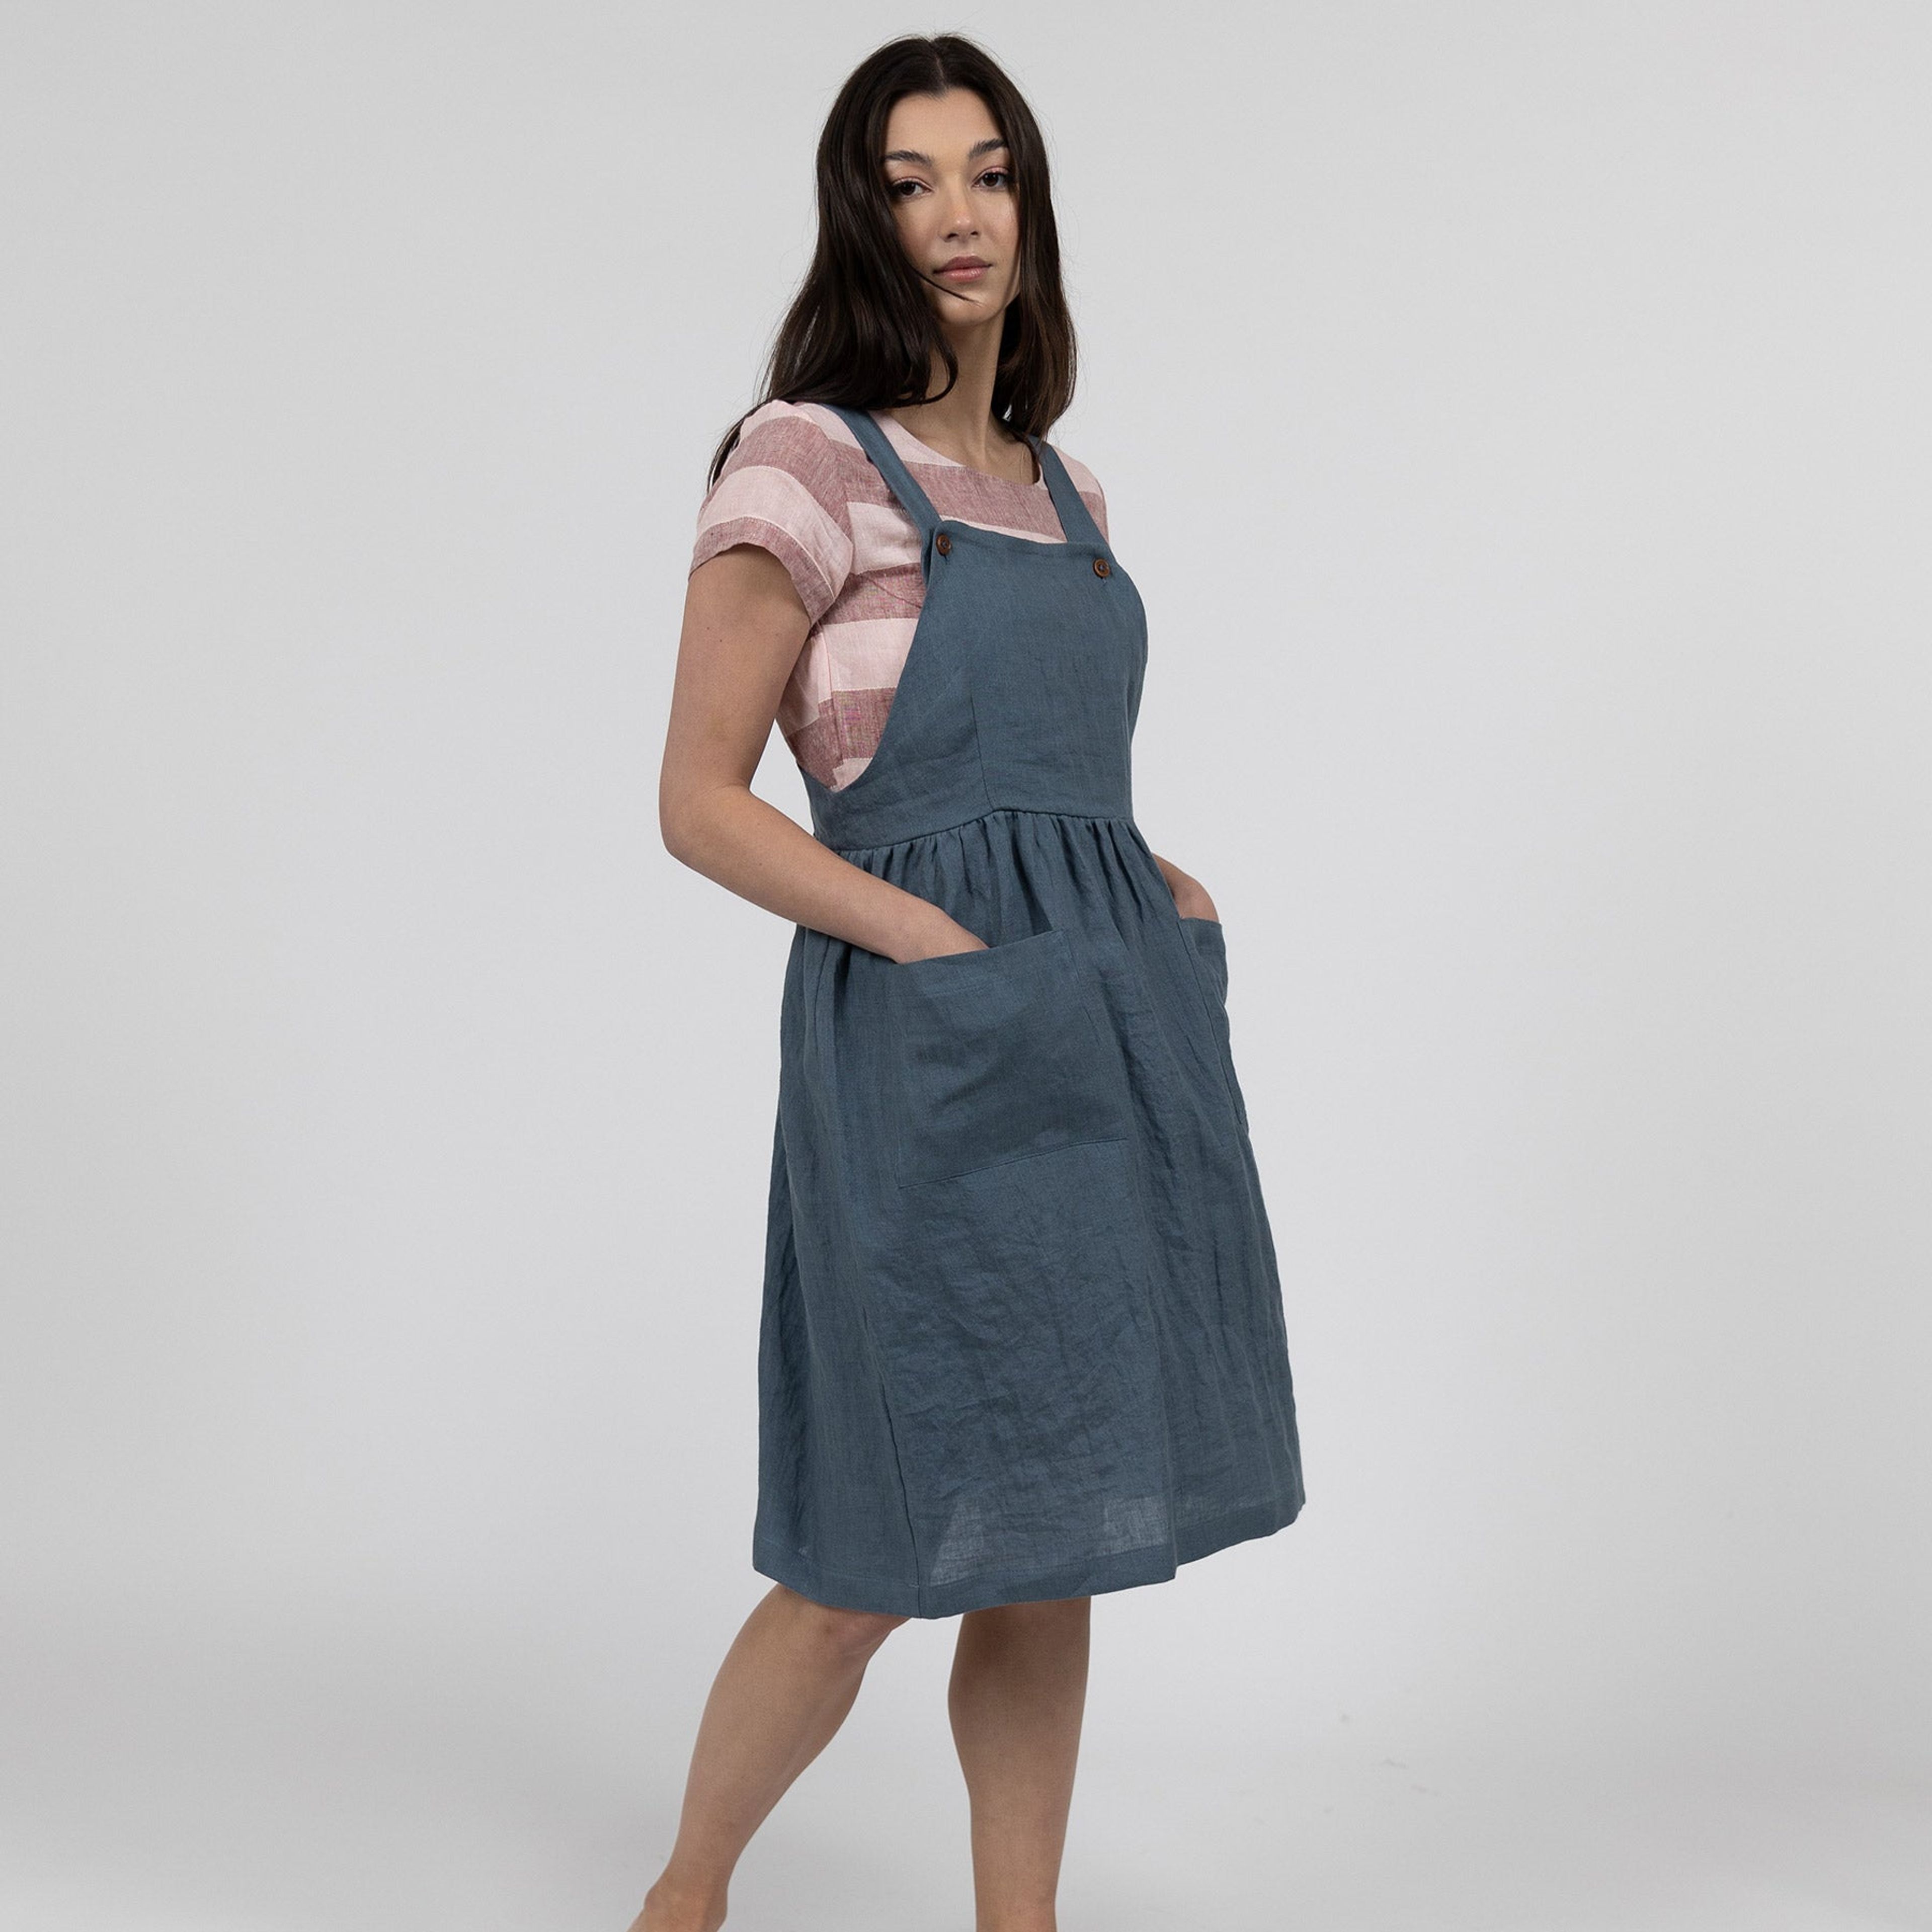 Model No.32 The Pinafore Dress in Prussian Blue